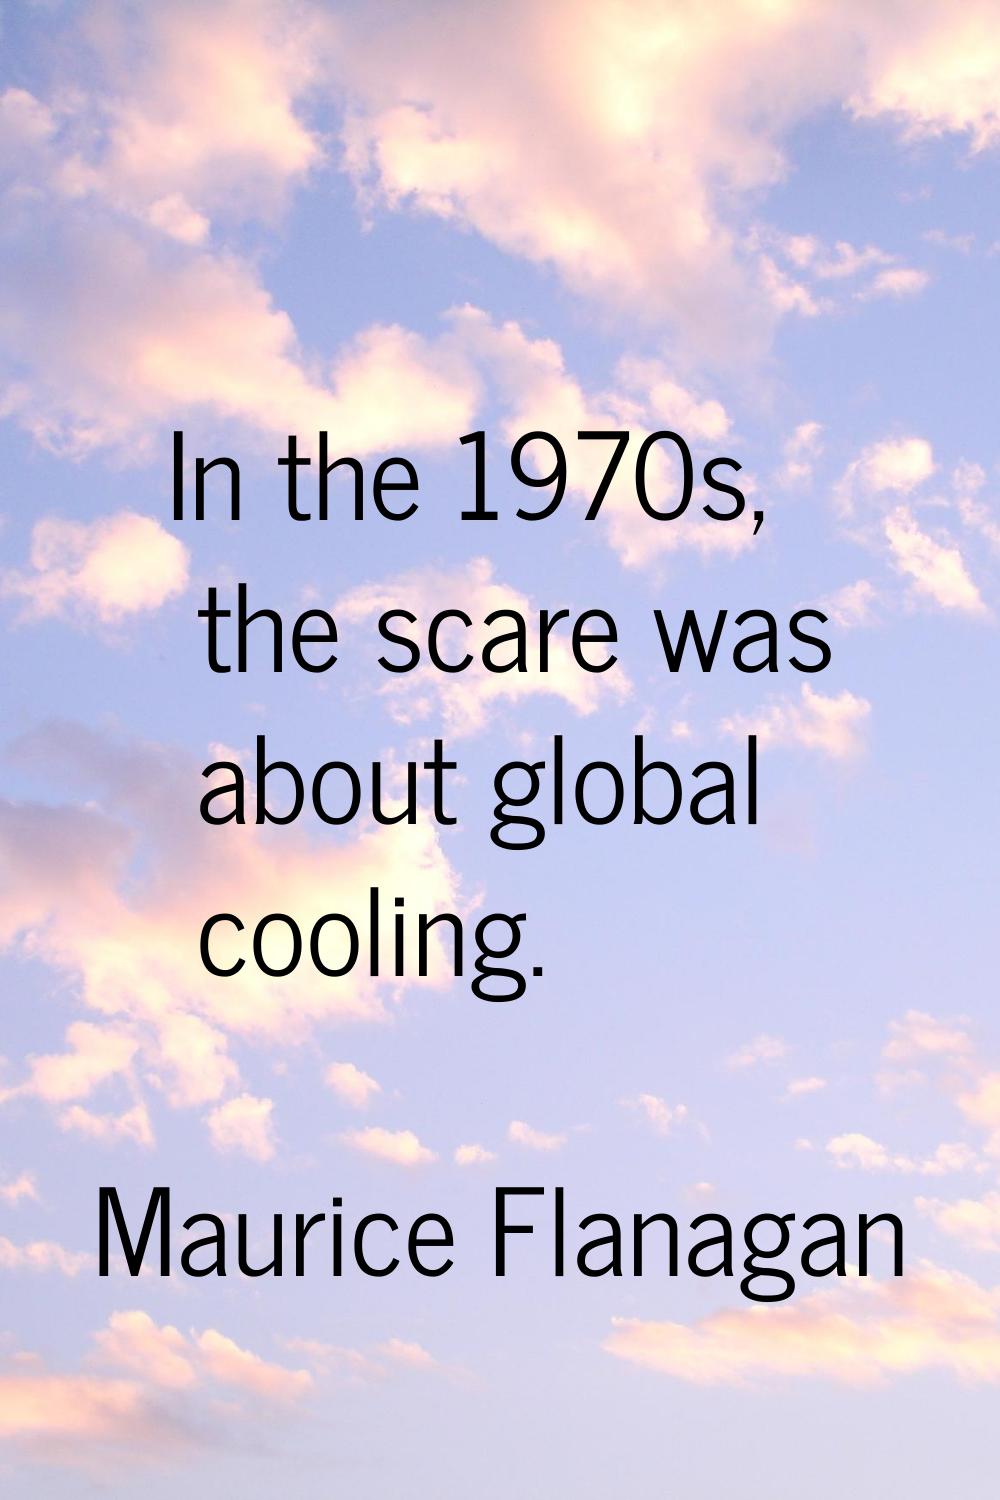 In the 1970s, the scare was about global cooling.